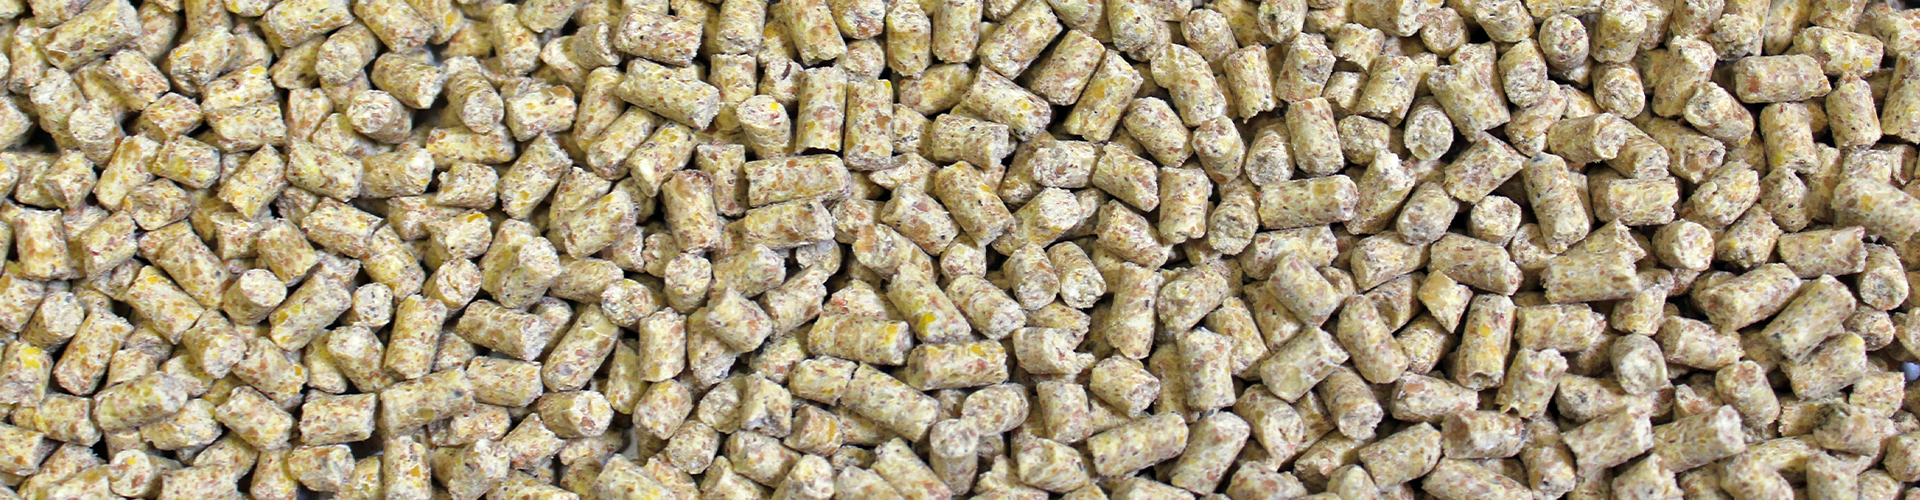 Poultry Grower/Finisher Crumblet feed closeup image